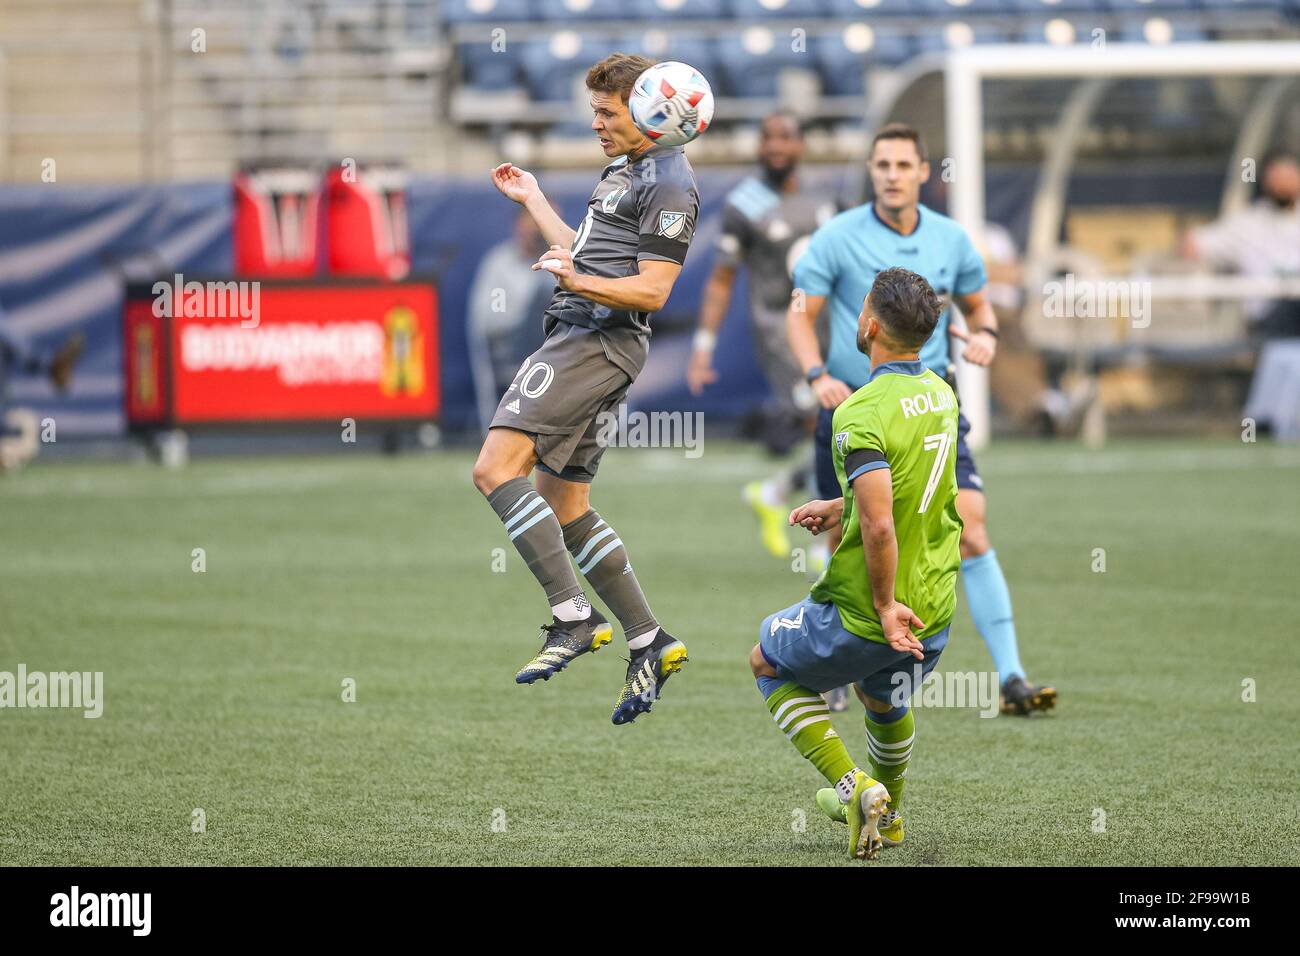 Minnesota United FC midfielder Wil Trapp (20) heads the ball against Seattle Sounders FC midfielder Cristian Roldan (7) during the first half of an ML Stock Photo